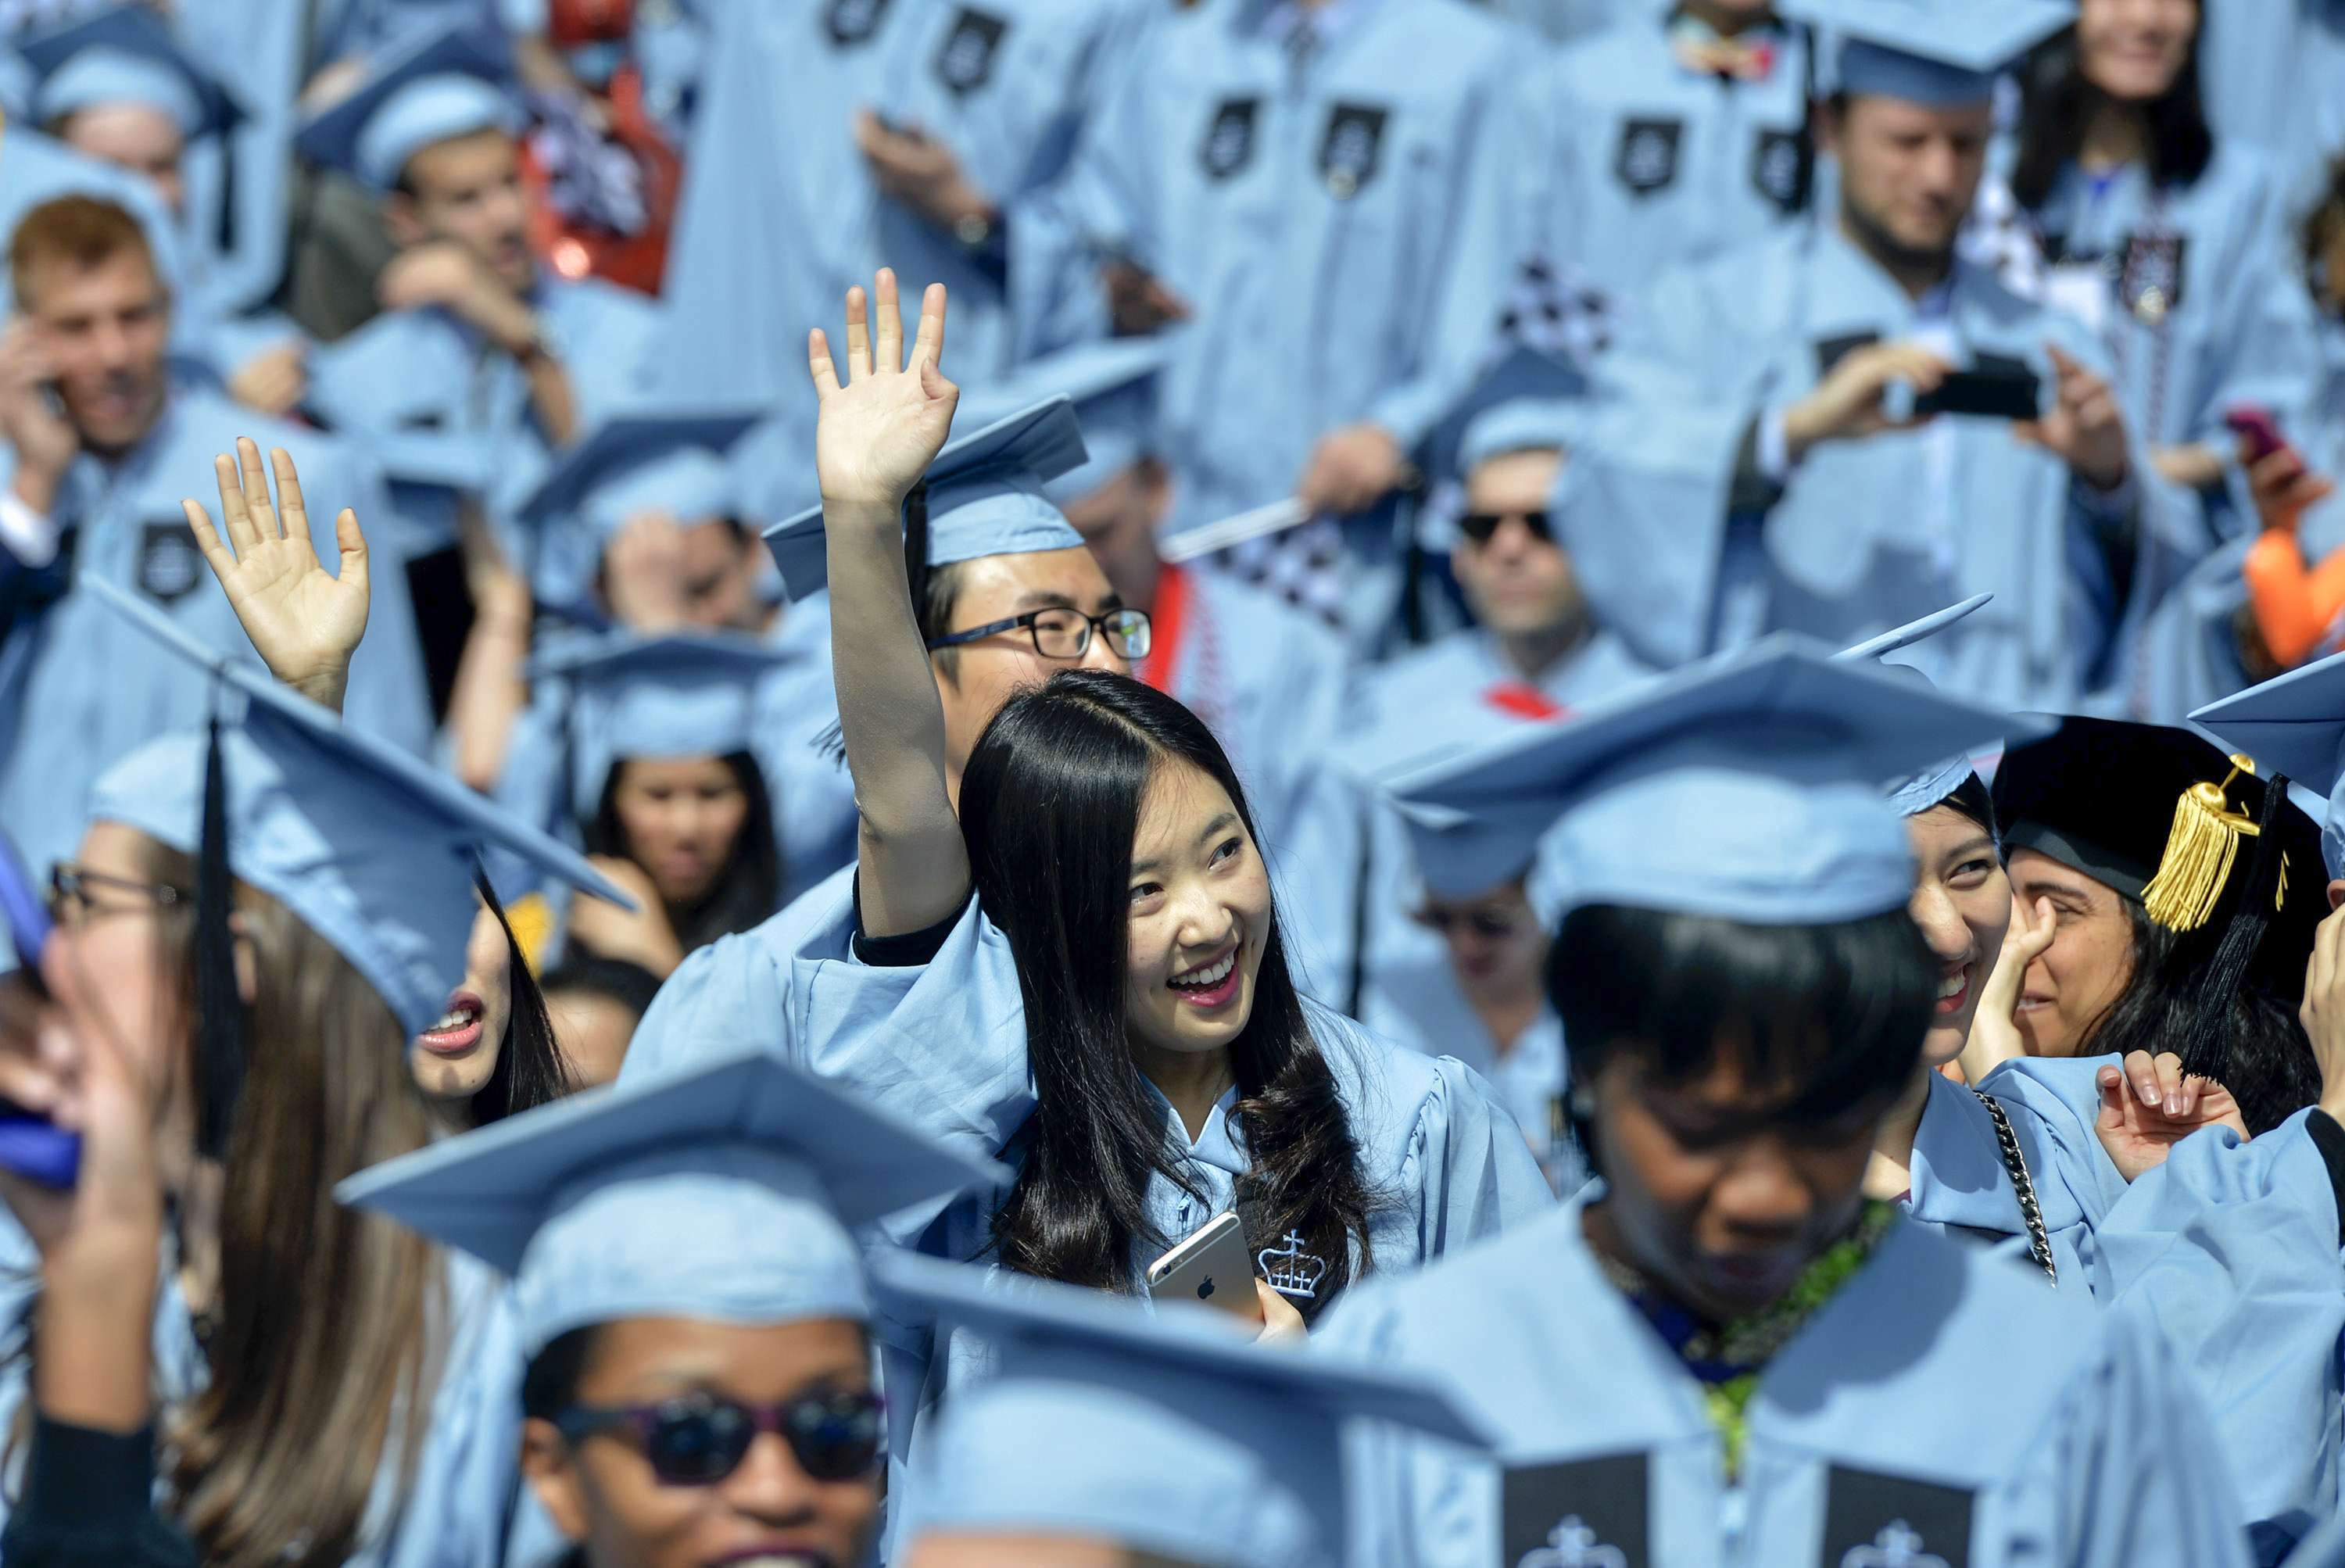 Foreign students who earn a degree in science, technology, engineering or maths from a university in the United States will now be allowed to work for three years following graduation. Photo: Xinhua